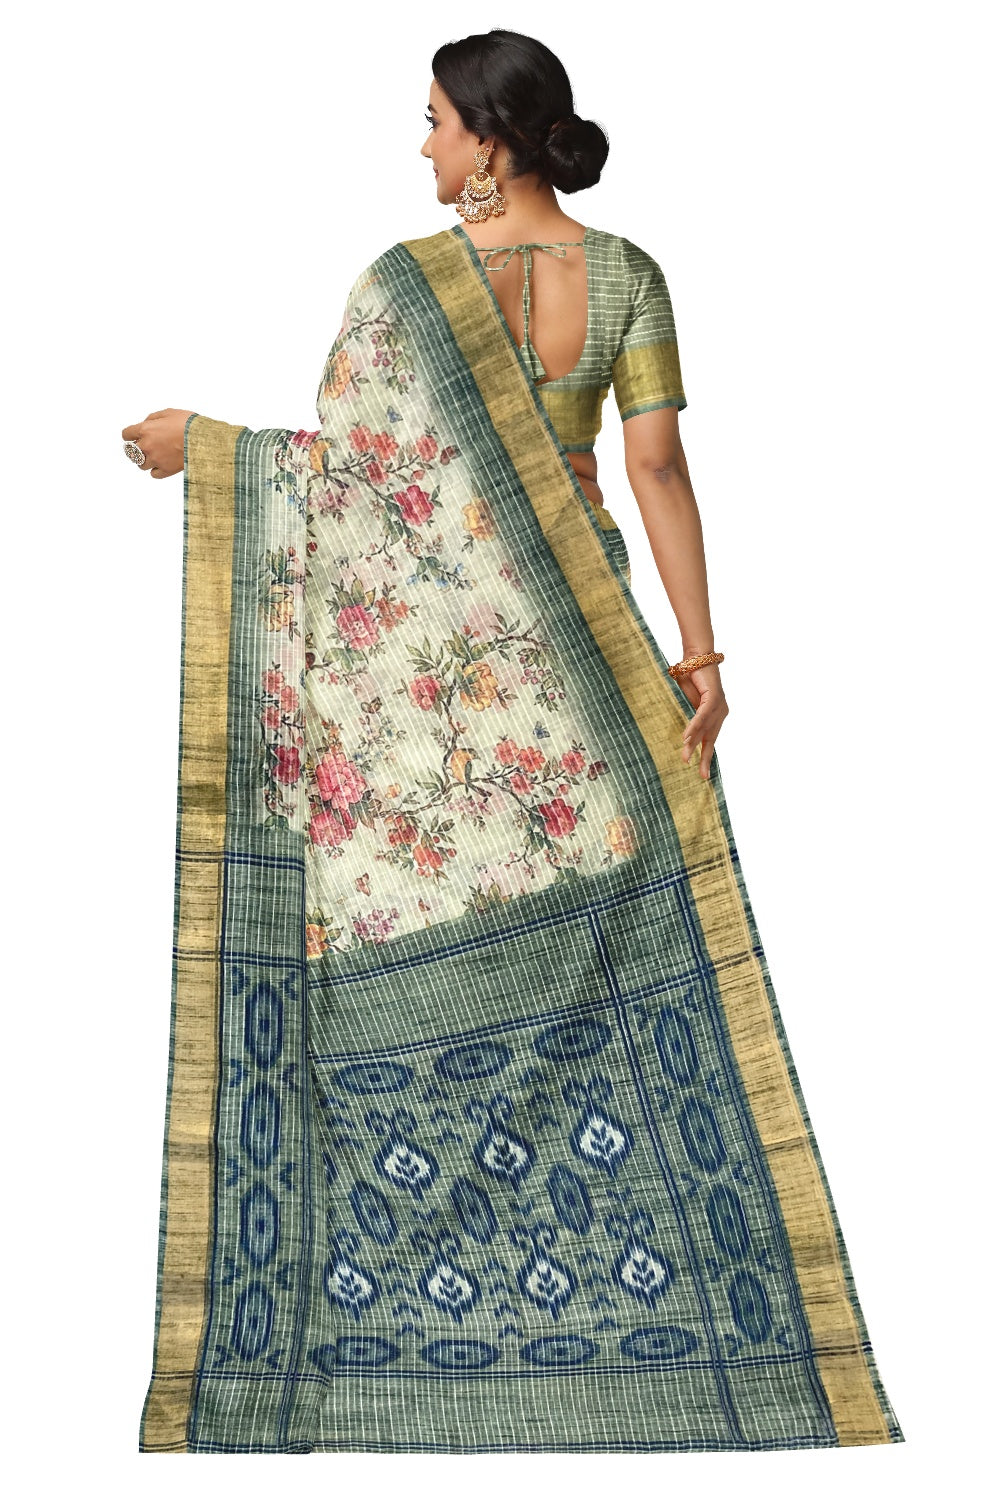 Southloom Cotton Floral Printed Pista Green Designer Saree with Tassels Works